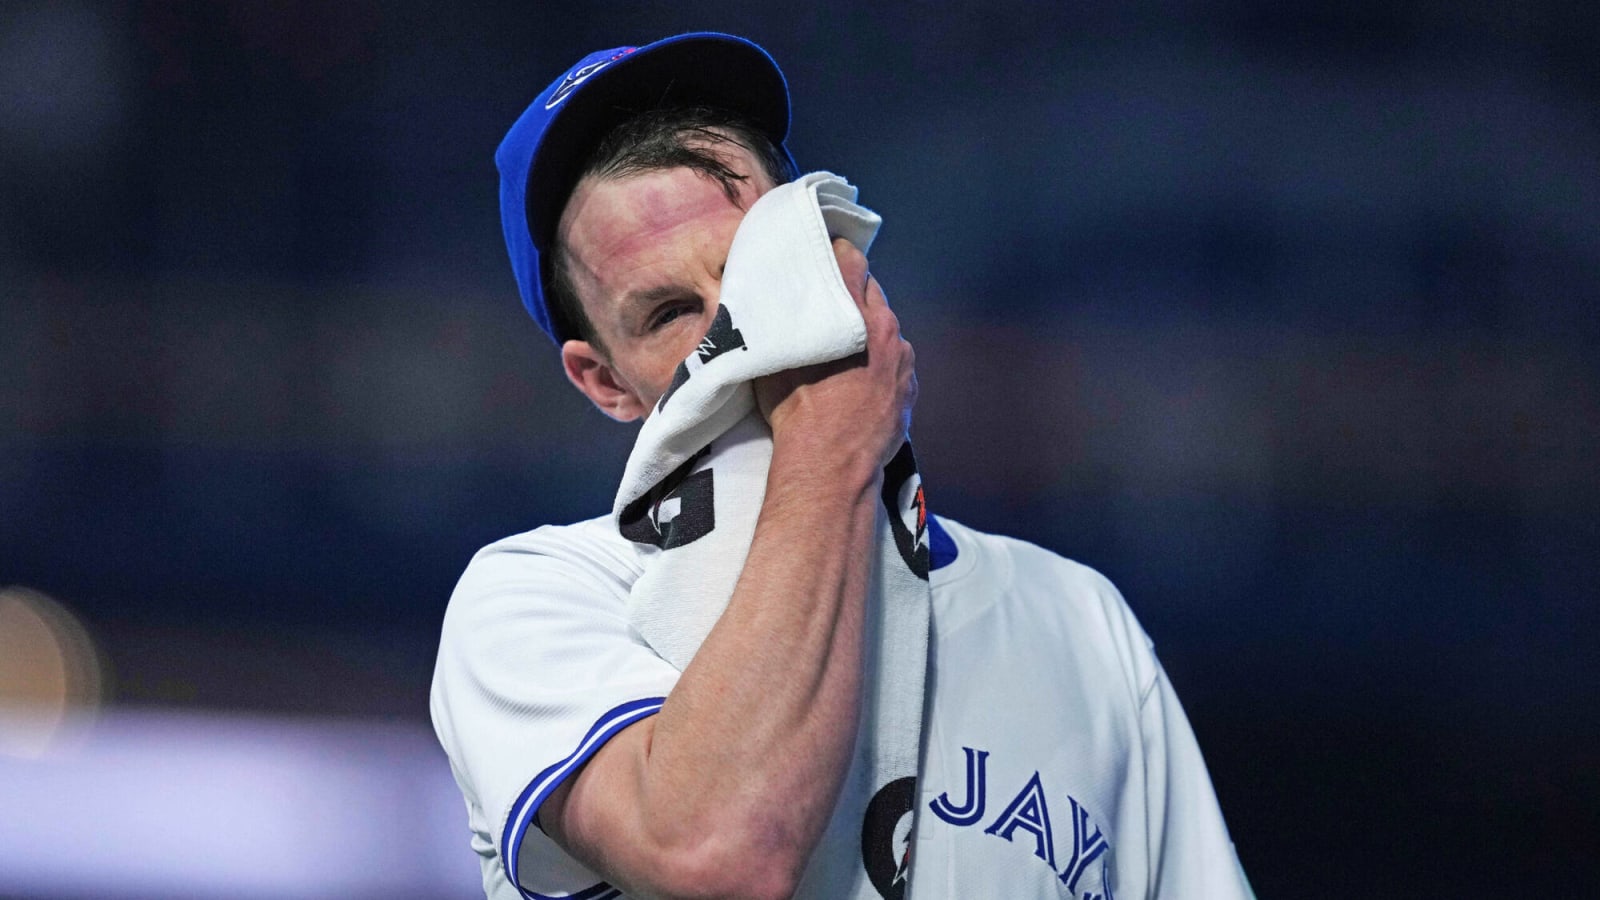 ‘If you have that answer, let us know:’ Blue Jays pitcher searches for answers to team’s struggles